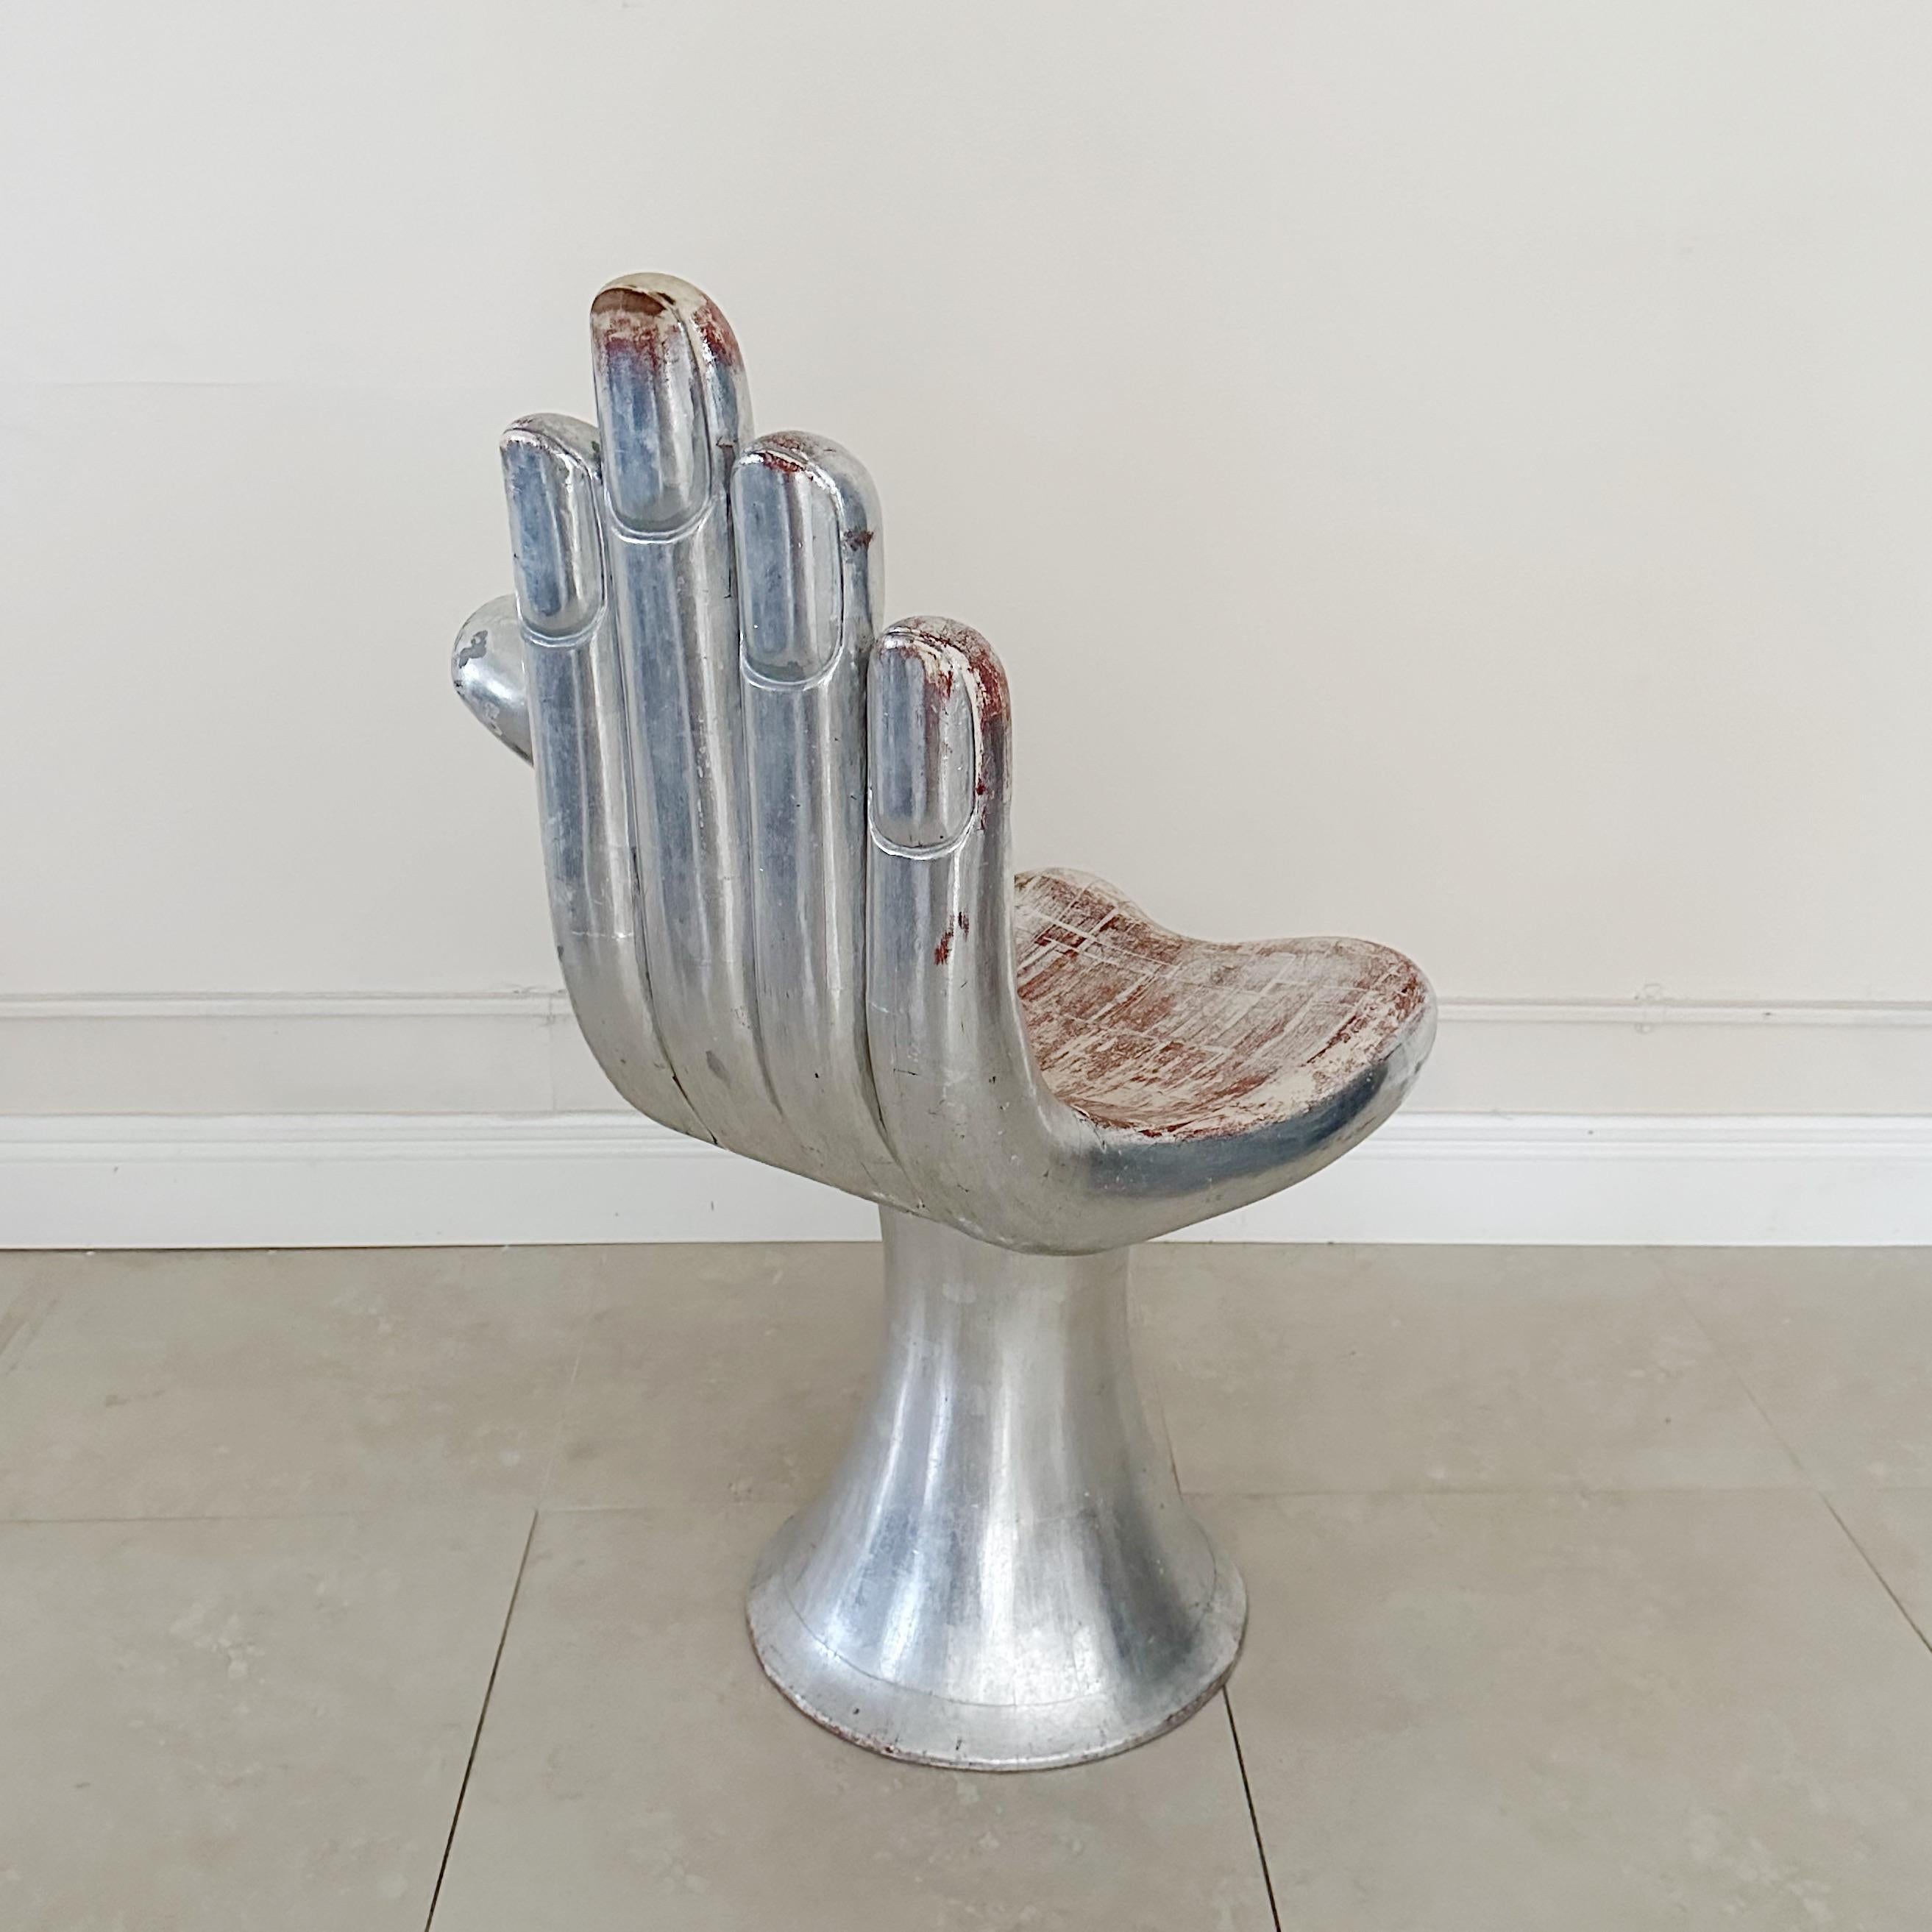 Pedro Friedeberg Silver-Gilt Hand Chair. Circa 1960s Mexico, This chair is an early example of the iconic “hand” chair designed and made by Pedro Friedeberg. The chair is hand-carved from solid mahogany and silver-leafed with a water gilt technique